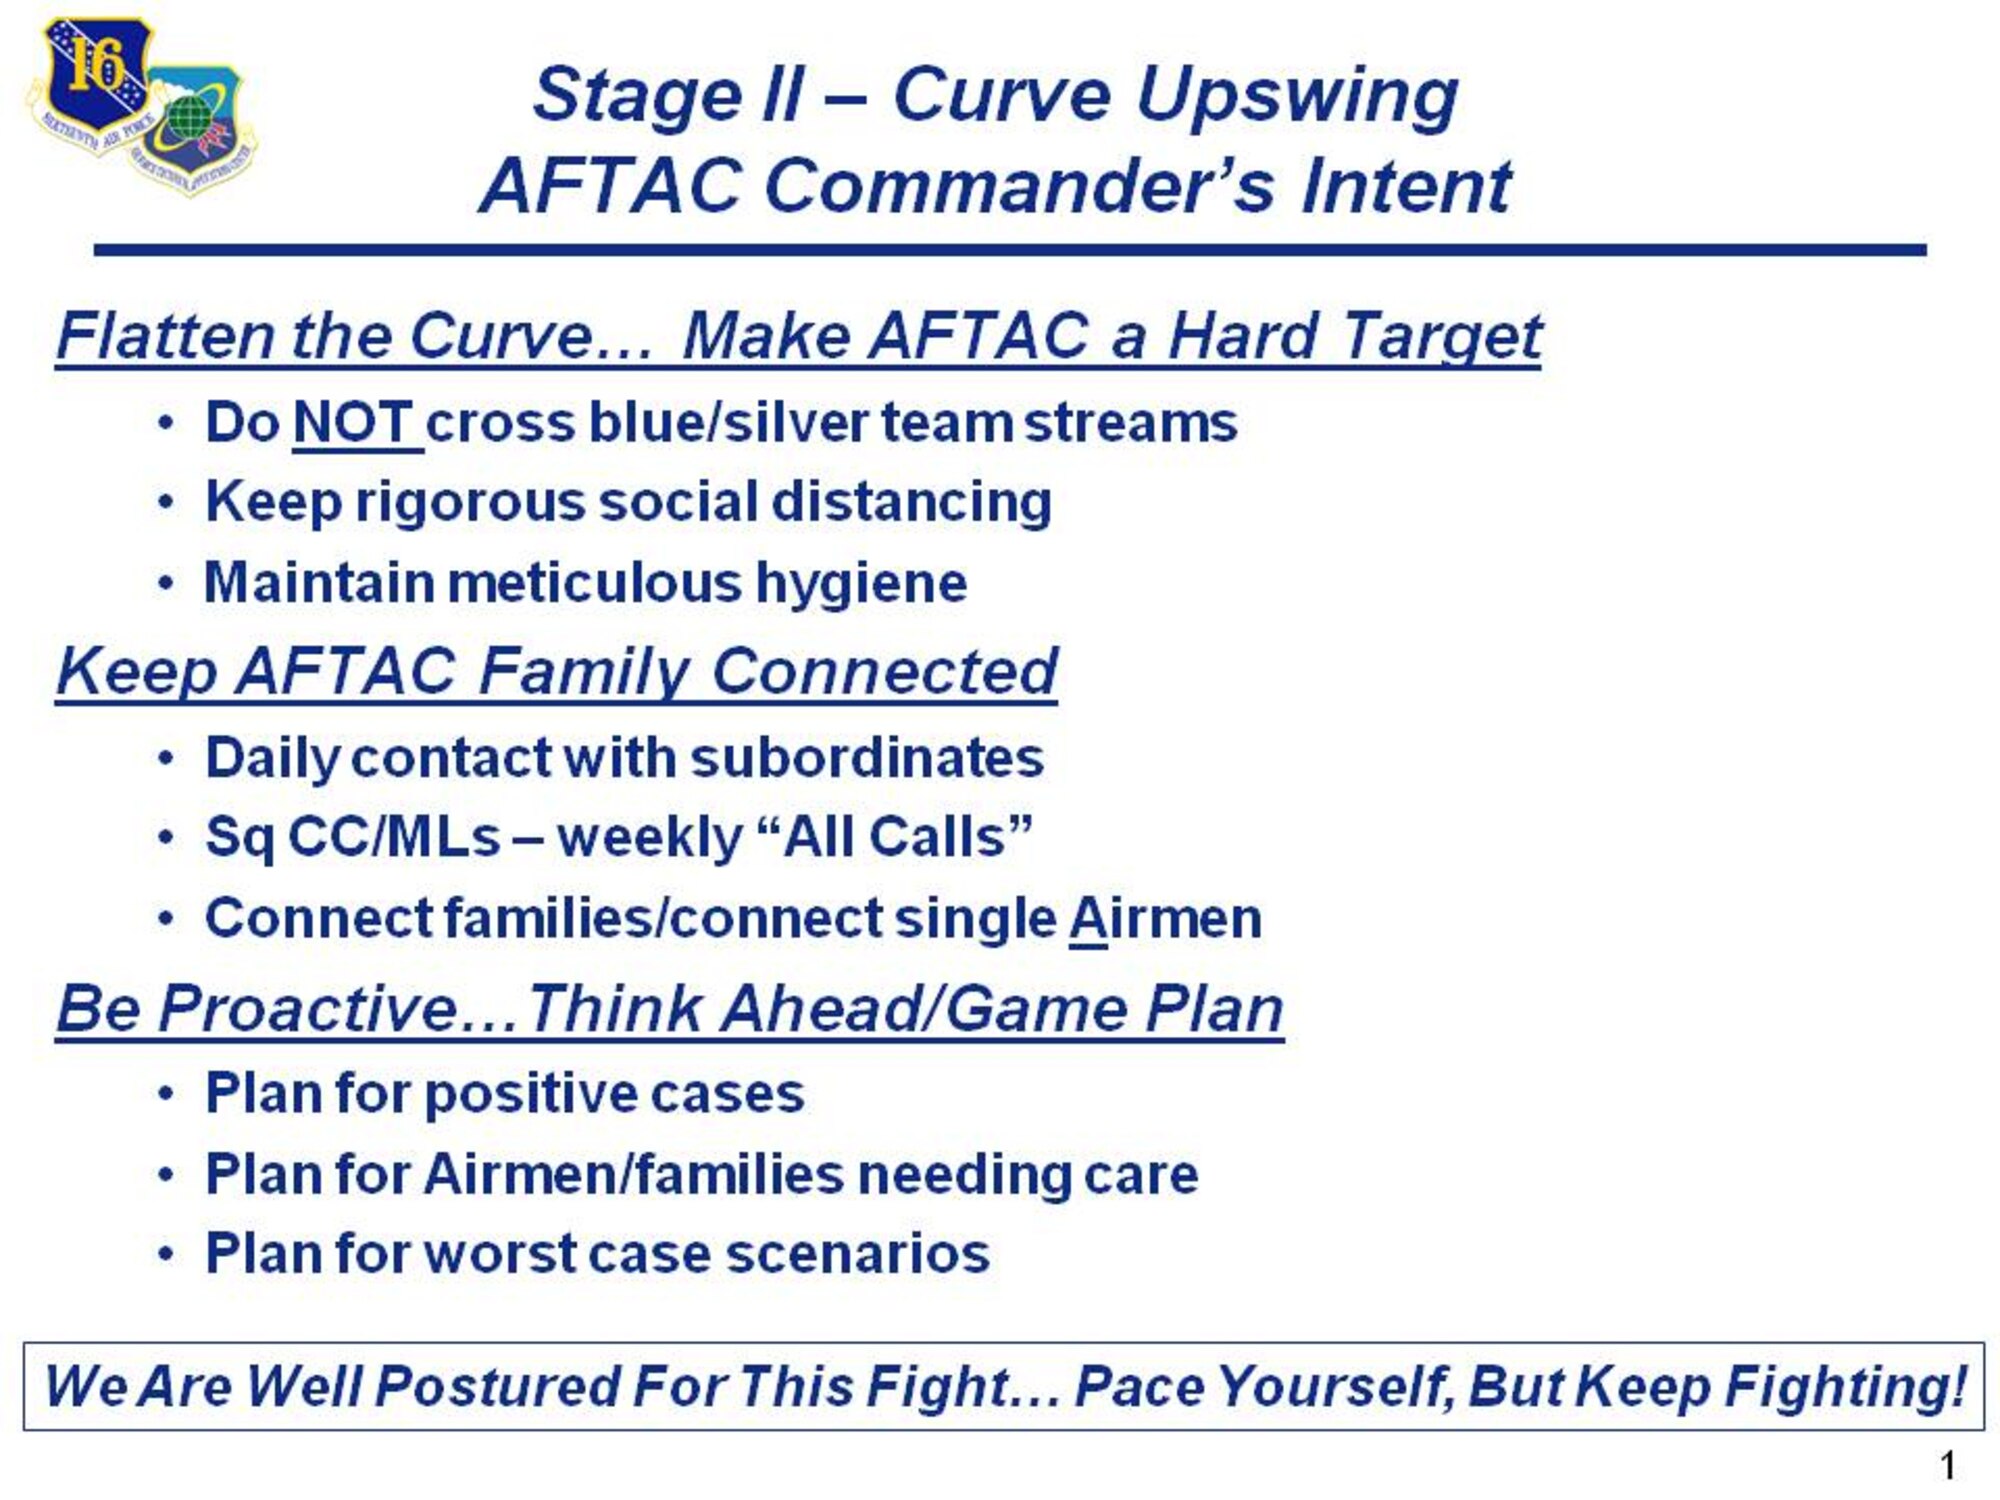 Informational slide shown during tele-Town Hall meeting conducted by Col. Chad Hartman, commander of the Air Force Technical Applications Center, Patrick AFB, Fla., April 3, 2020, for members of the nuclear treaty monitoring center and their family members to discuss COVID-19 response efforts.  (U.S. Air Force photo by Susan A. Romano)